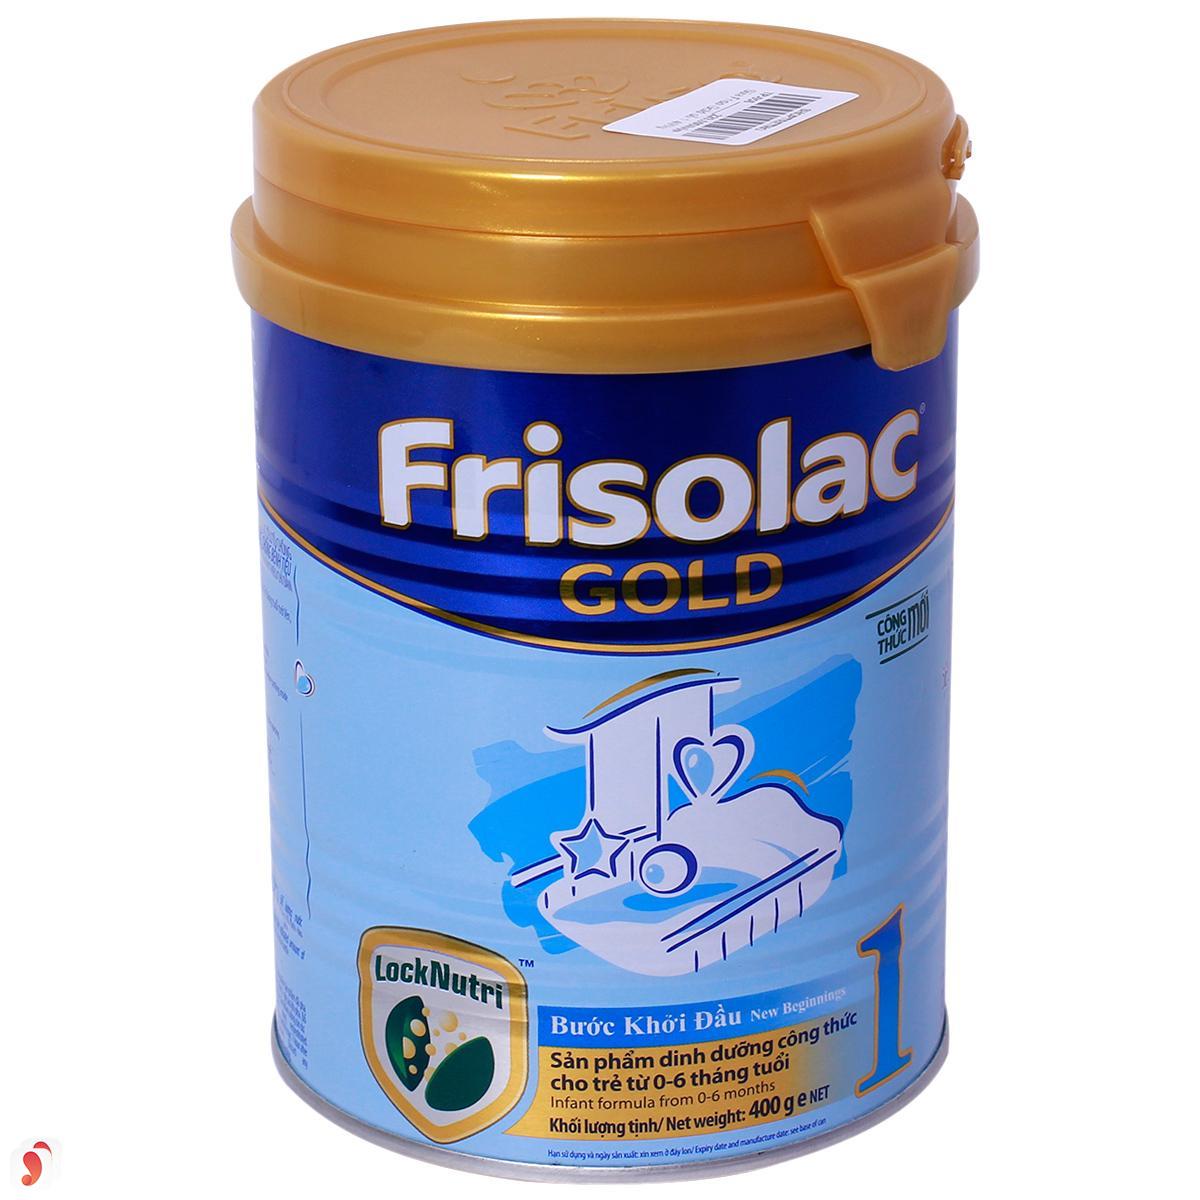 review chi tiết Frisolac Gold 1 1